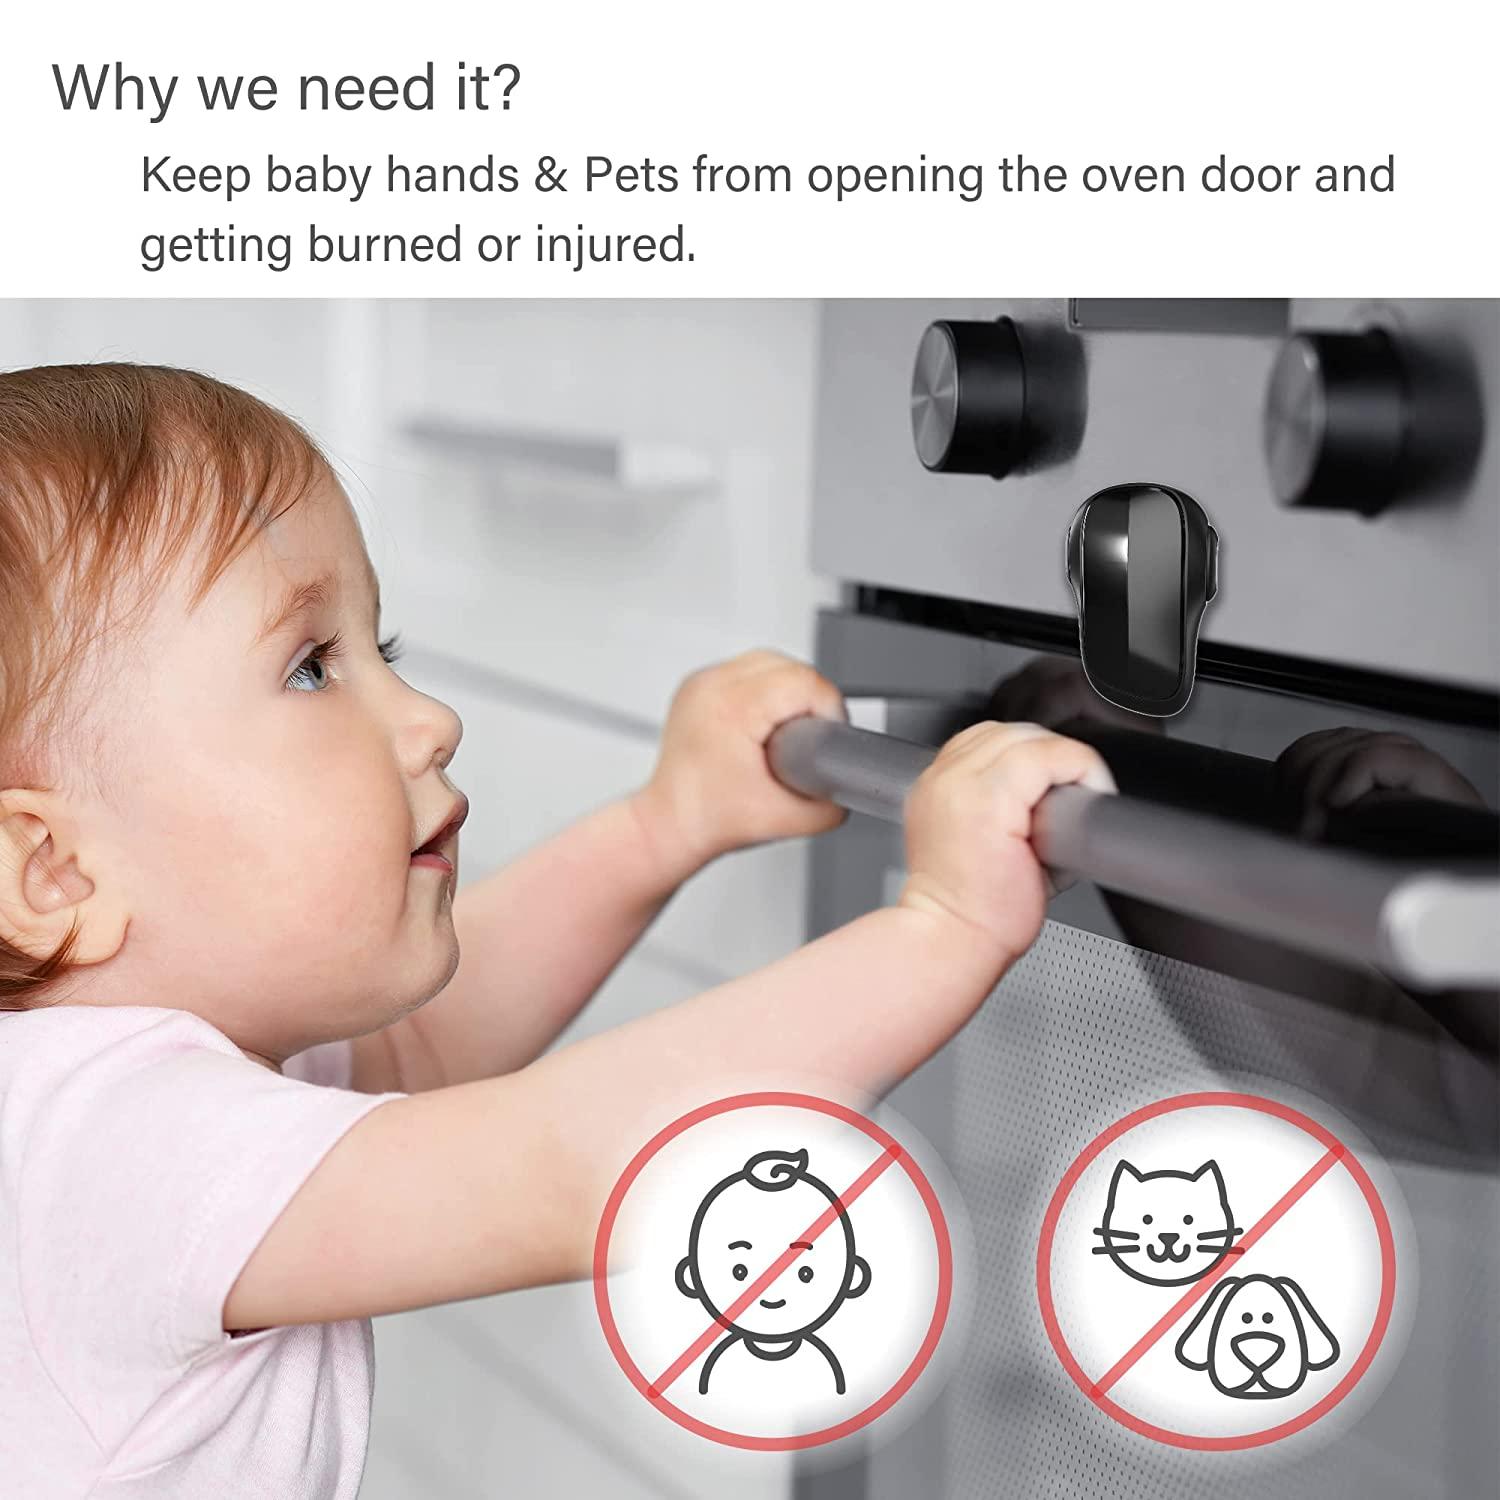 BABY DROM Oven Door Lock Child Safety, Heat-Resistant Easy to Install,  Childproof Oven Locks for Toddlers, no Screws or Drills (Black)